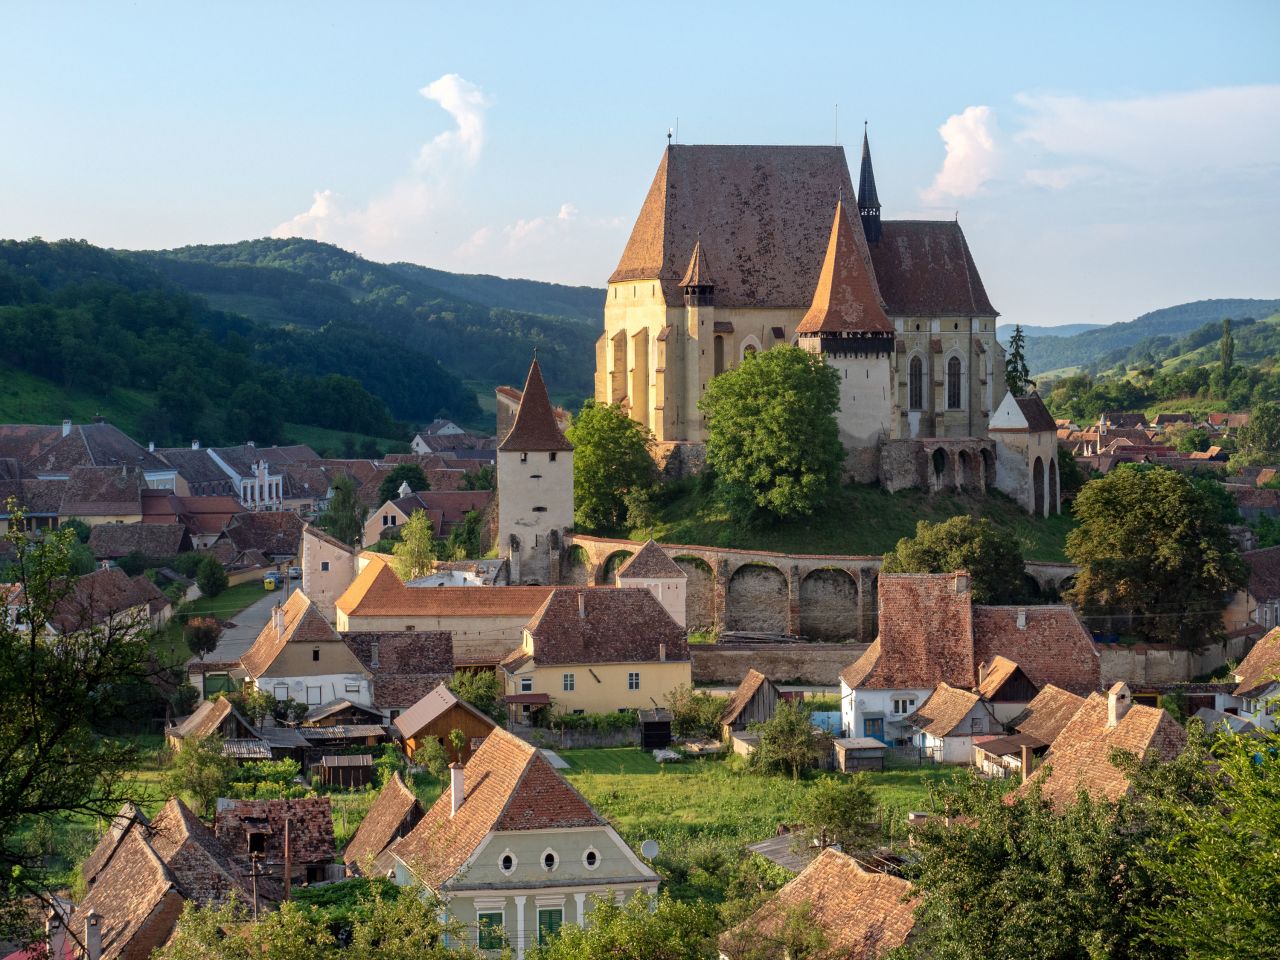 Biertan is one of the most important Saxon villages with fortified churches in Transylvania, Romania. The Eastern European nation is now at Level 2.